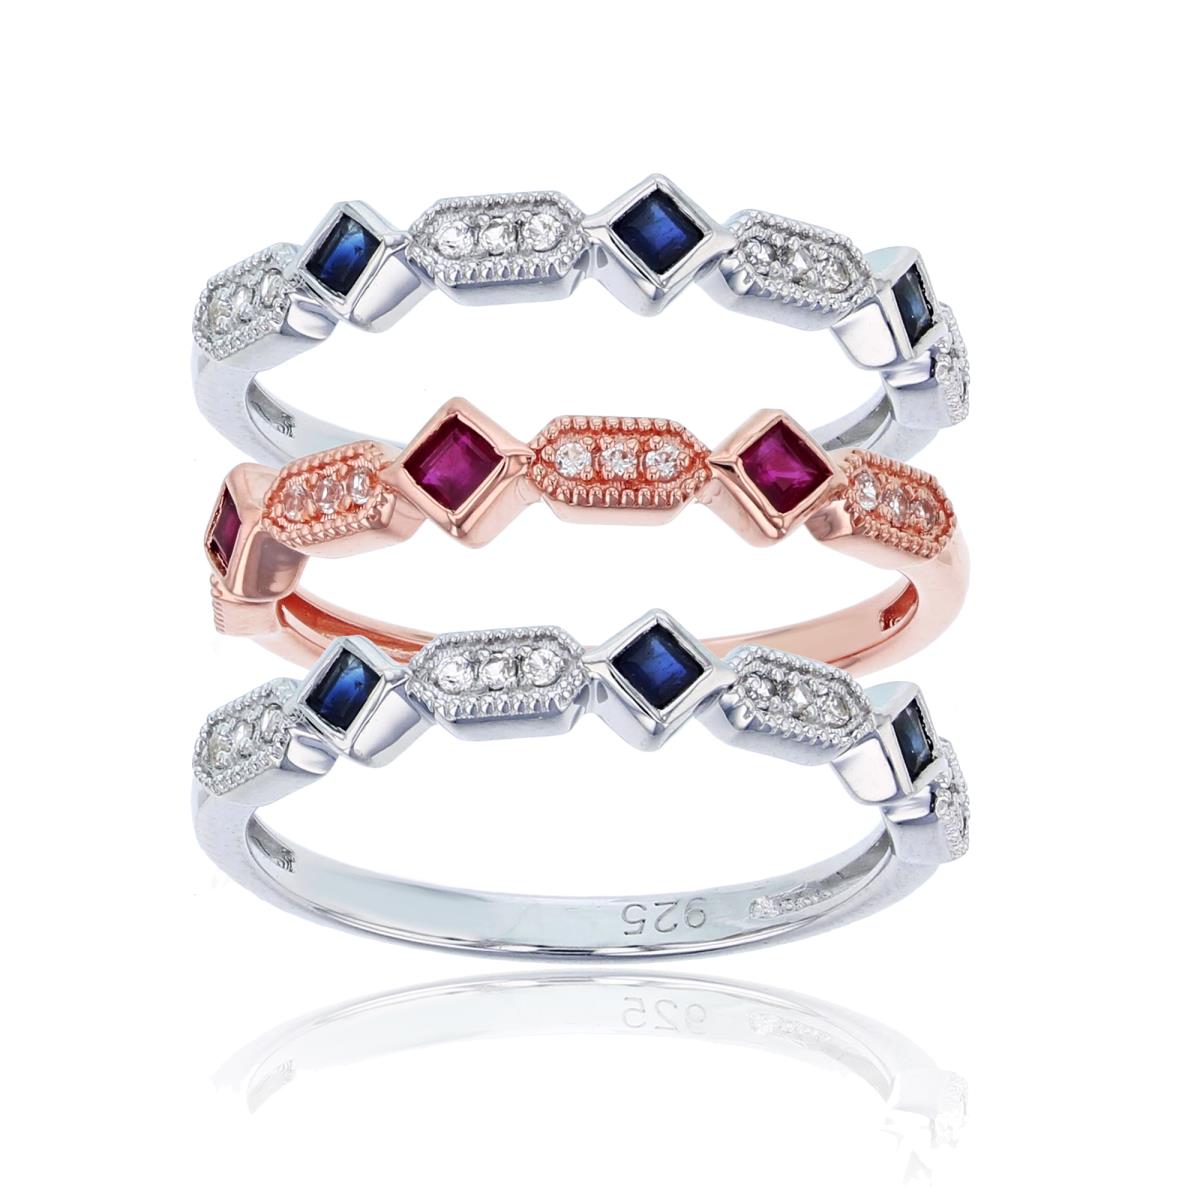 14K Rose/White Gold 0.18cttw Rnd Diamonds & SQ Ruby/Sapphire 3-Stackable Rings